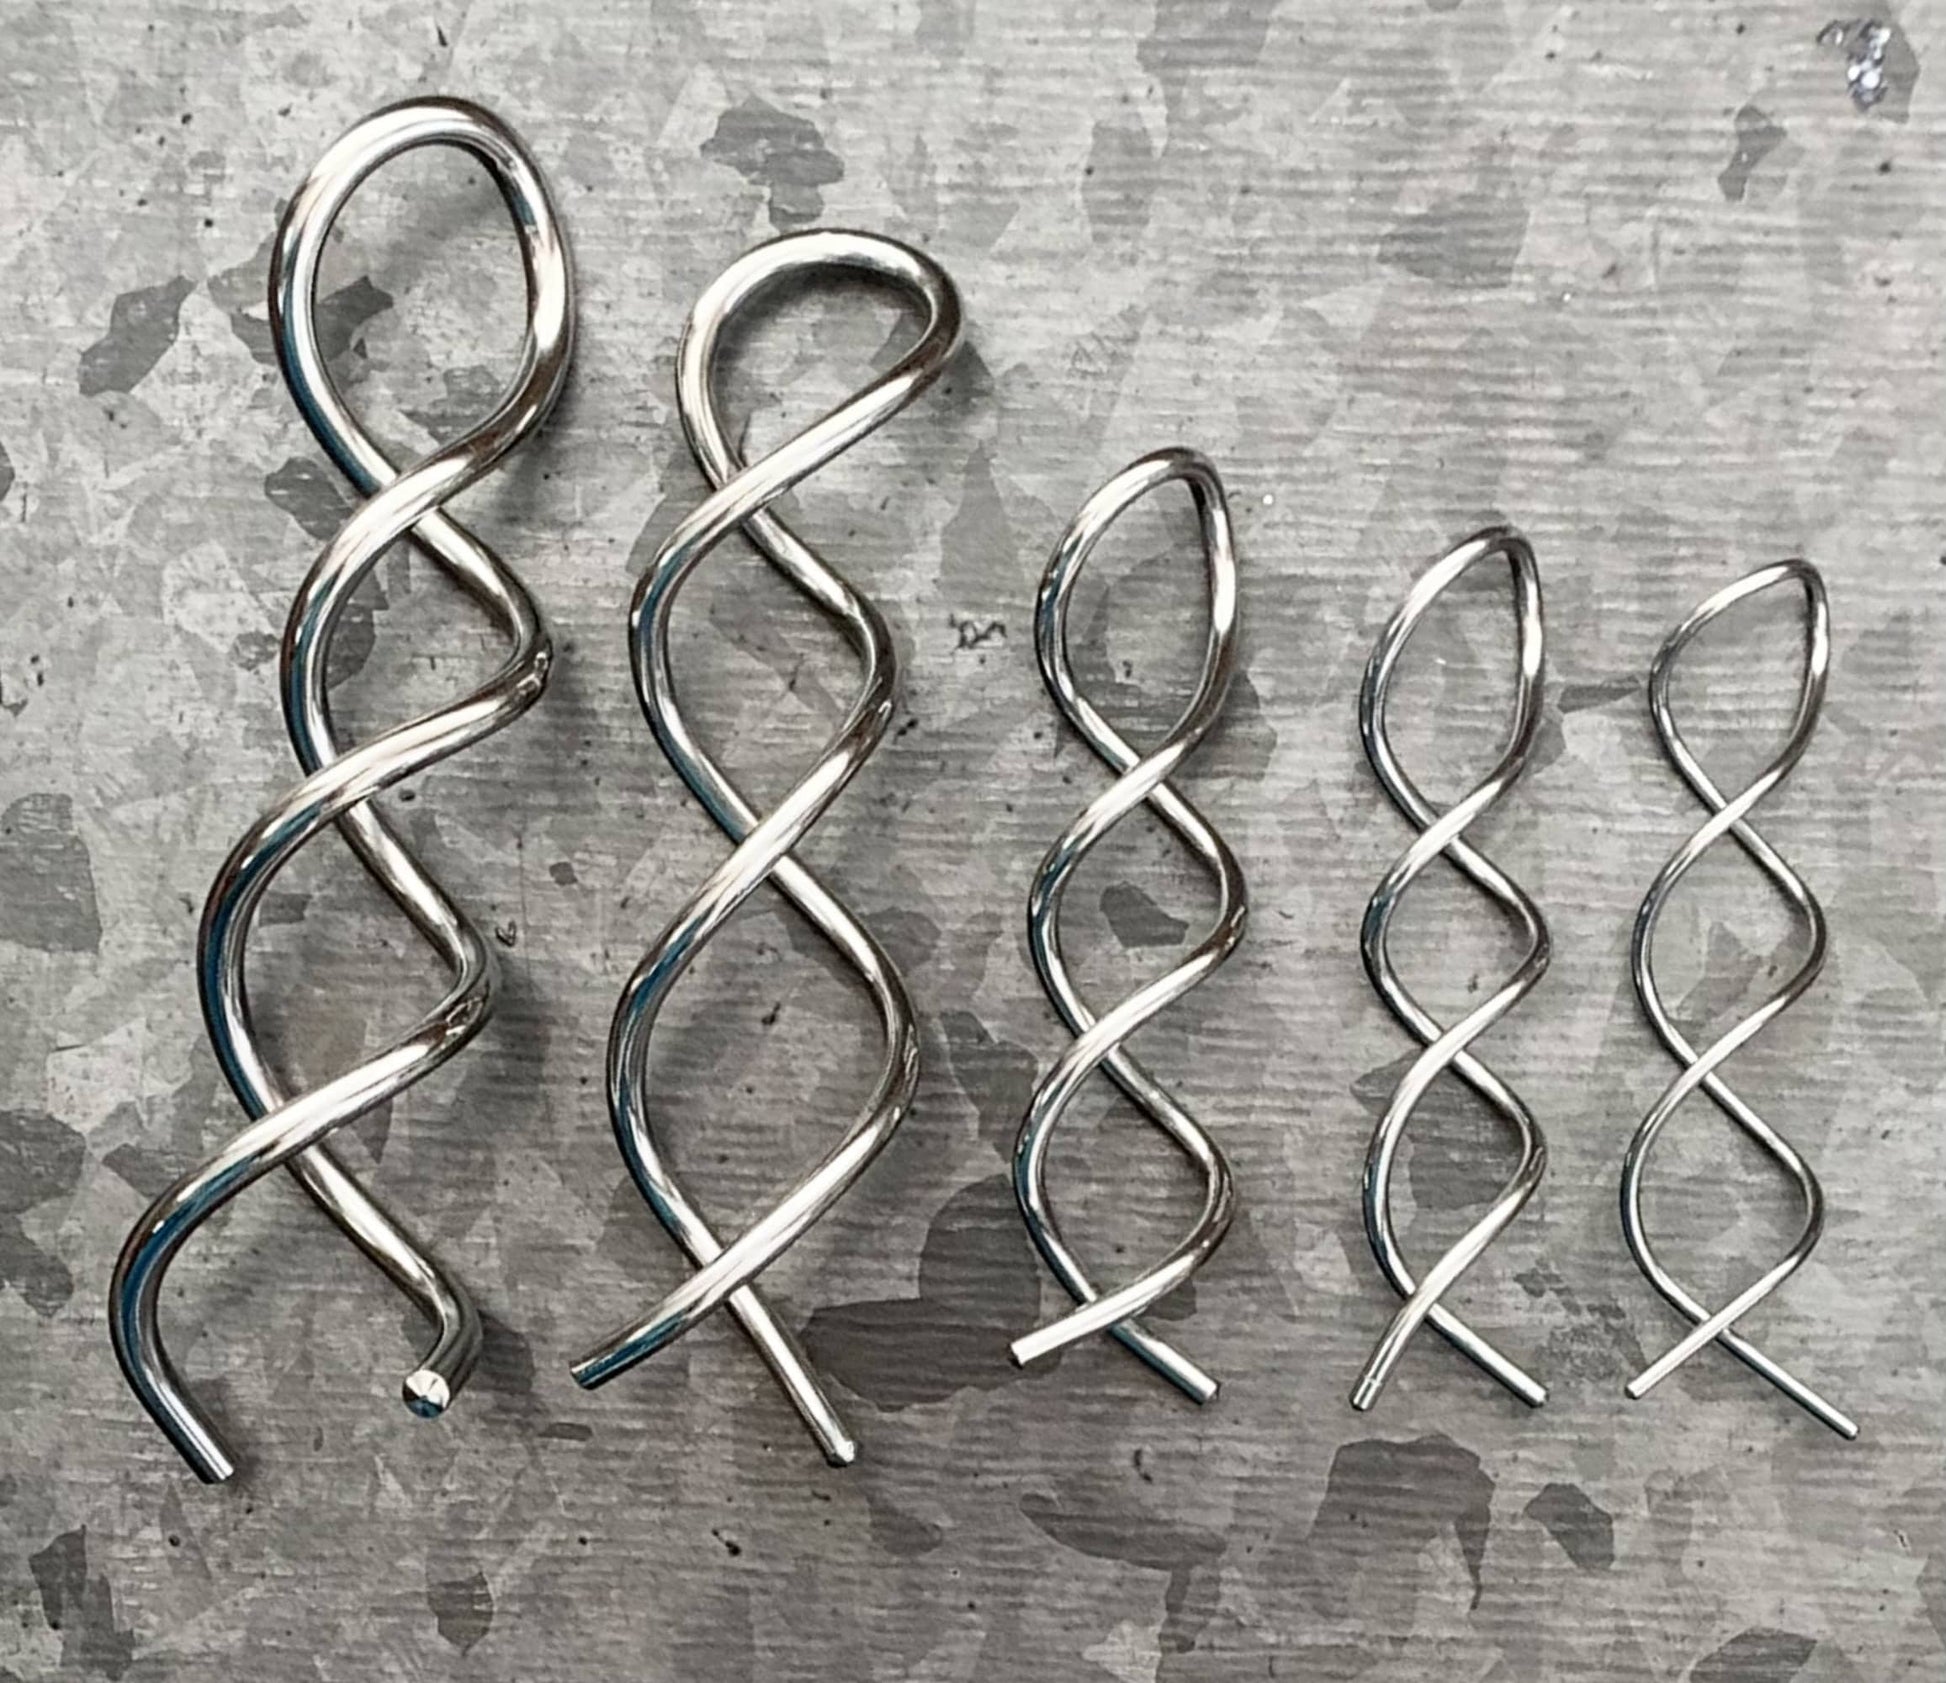 PAIR of Stunning 316L Surgical Steel Twist Tail Hanging Tapers Expanders / Plugs - Gauges 16g (1.3mm) thru 8g (3mm) available!